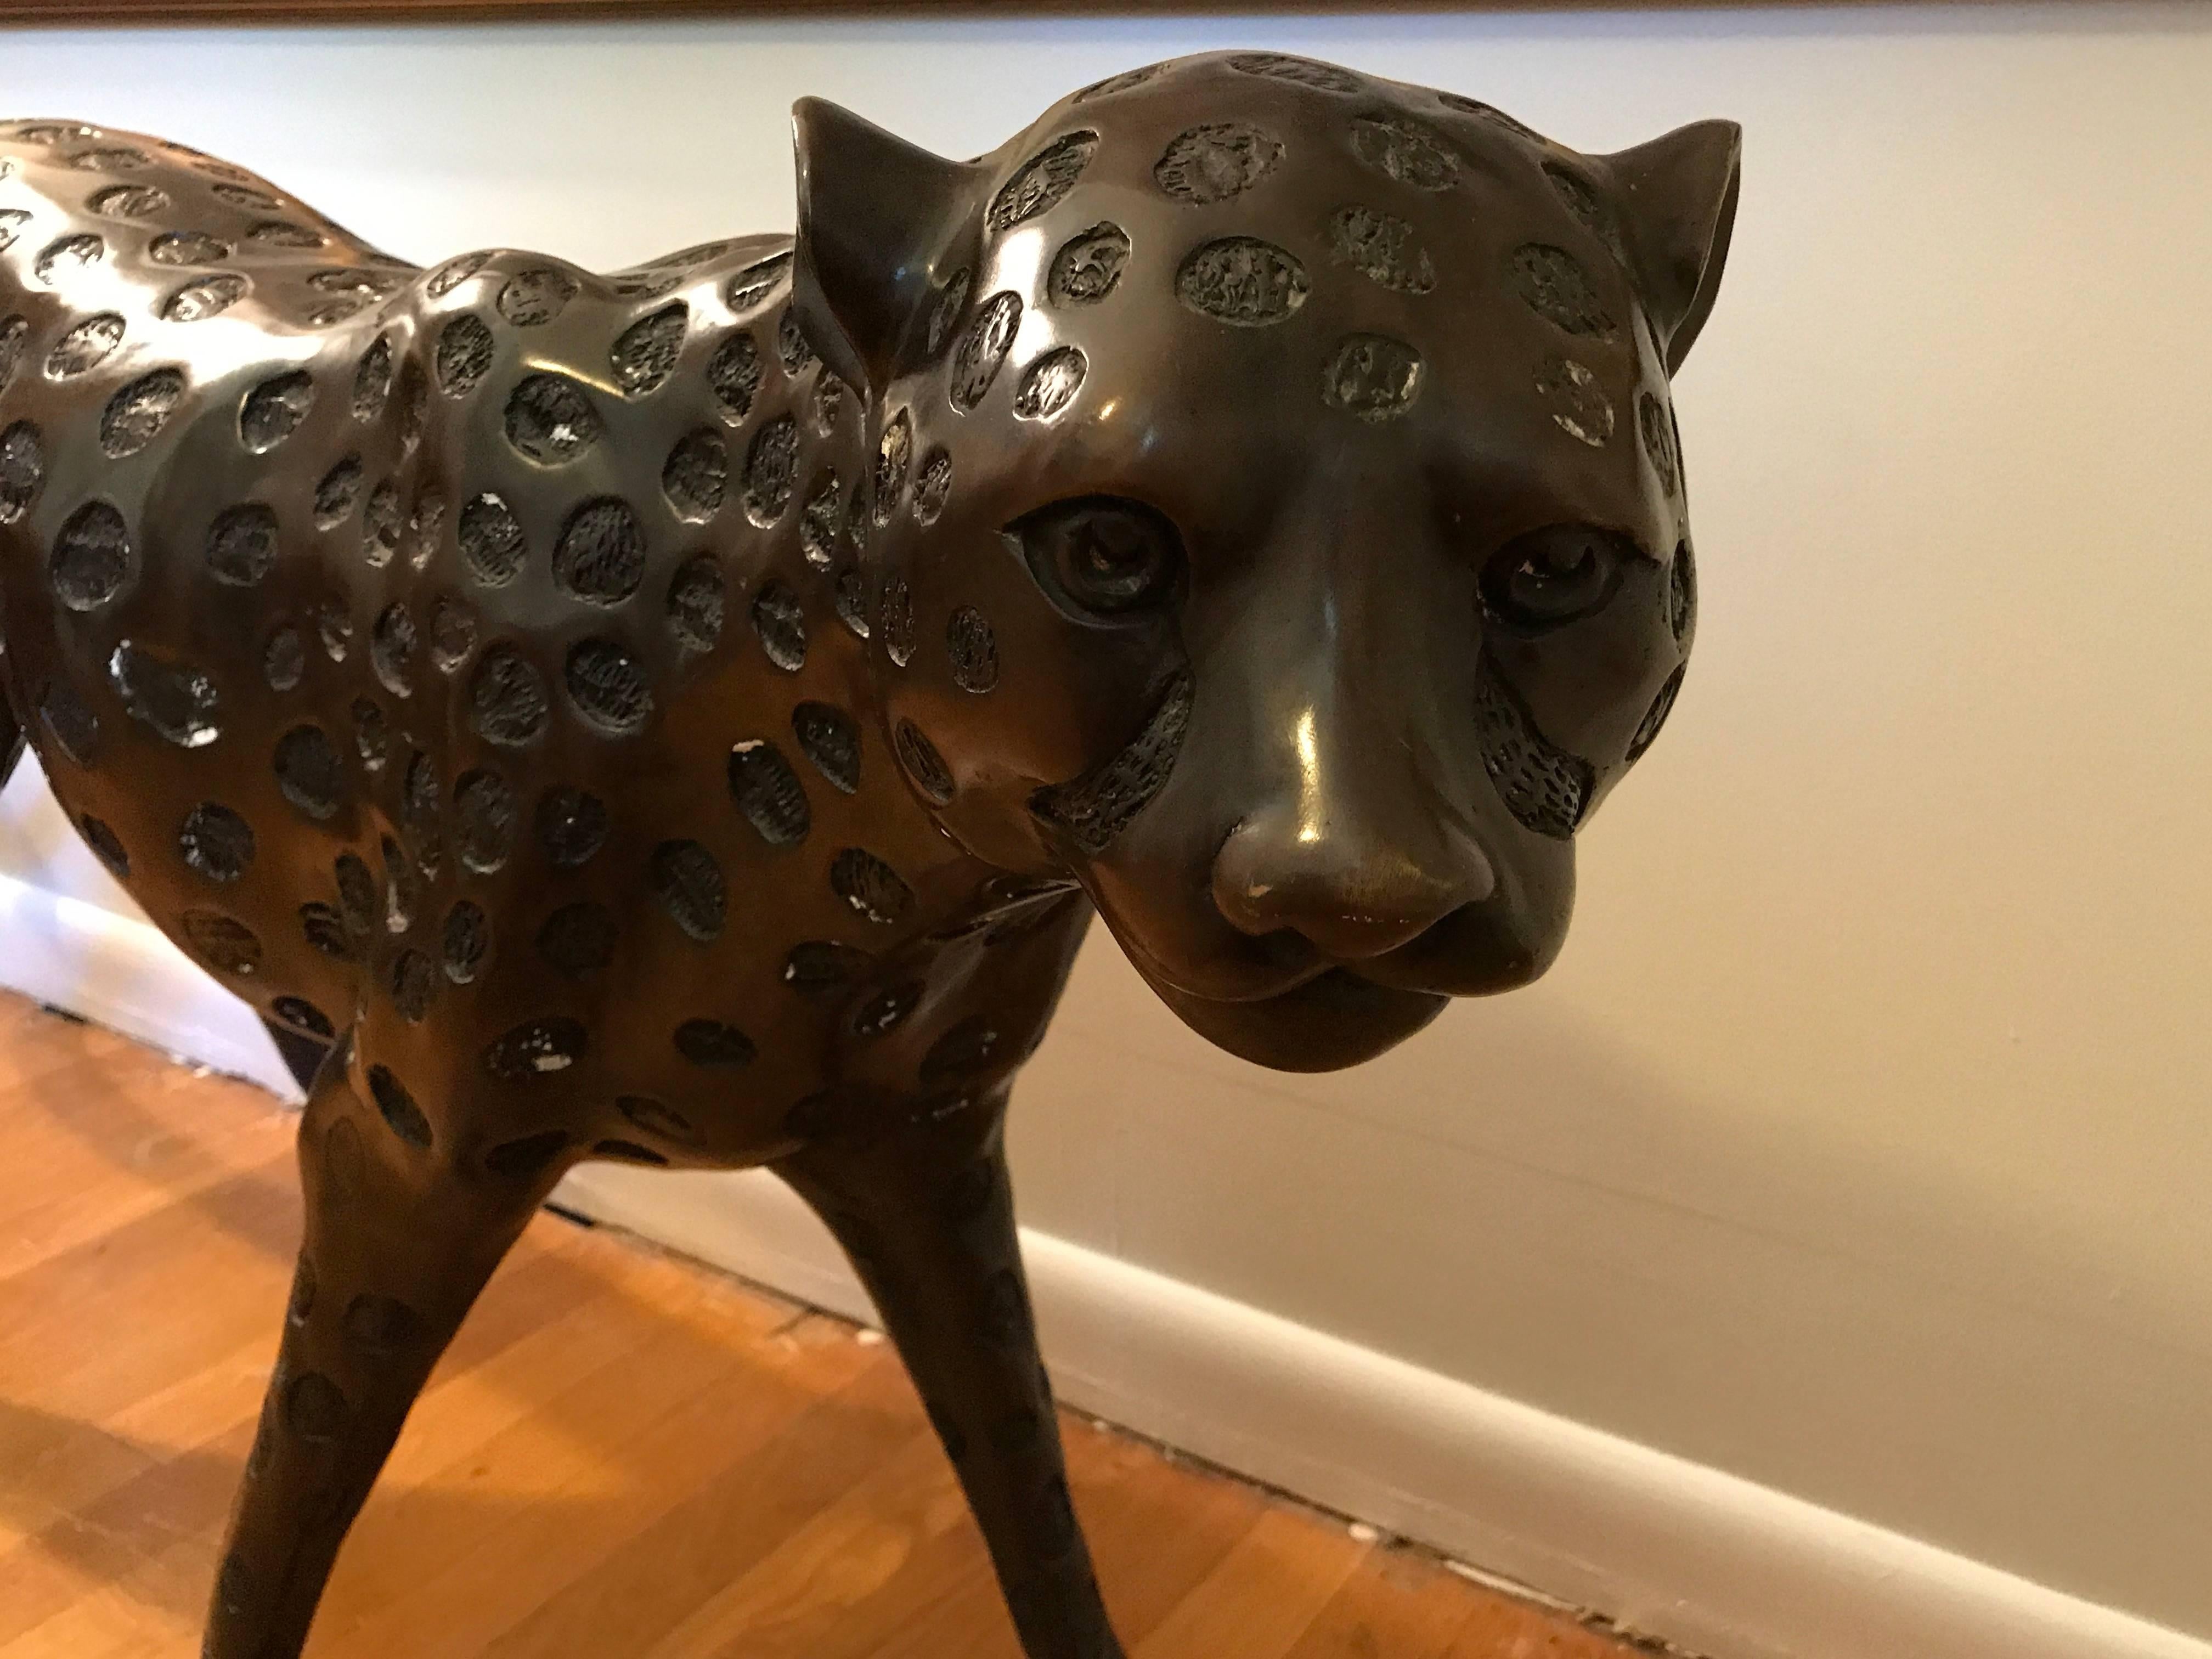 Offered is a stunning, 1970s French life-sized leopard sculpture. The piece is extremely heavy and sturdy... Difficult to weigh, due to its size. Needs two people to lift and move around. Bronzed metal. 